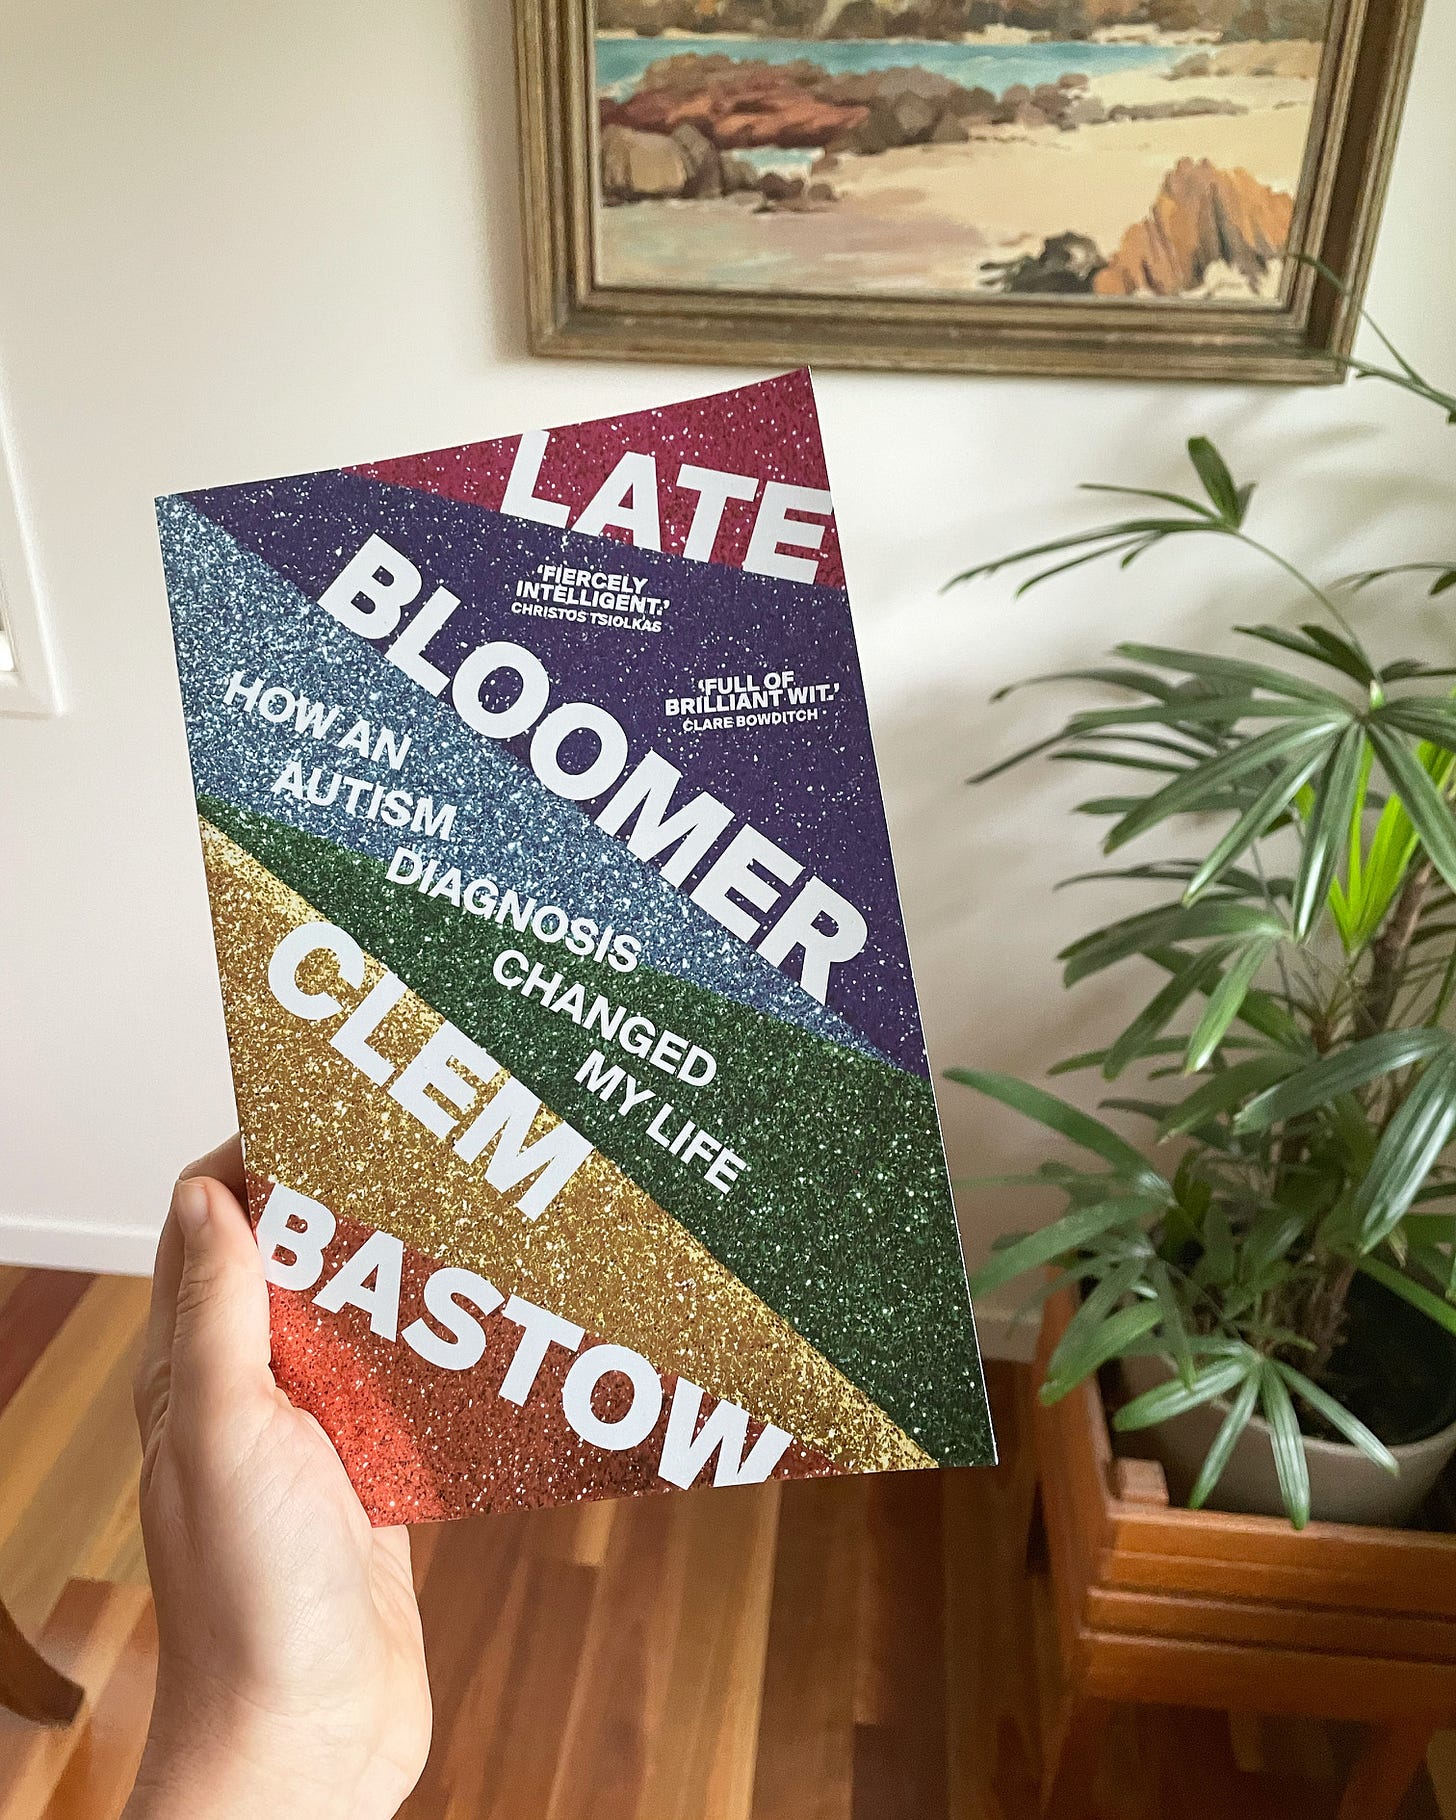 I am holding a copy of 'Late Bloomer' a book by Clem Bastow. My living room is in the background, with a plant and a painting. The book has a rainbow glittery cover